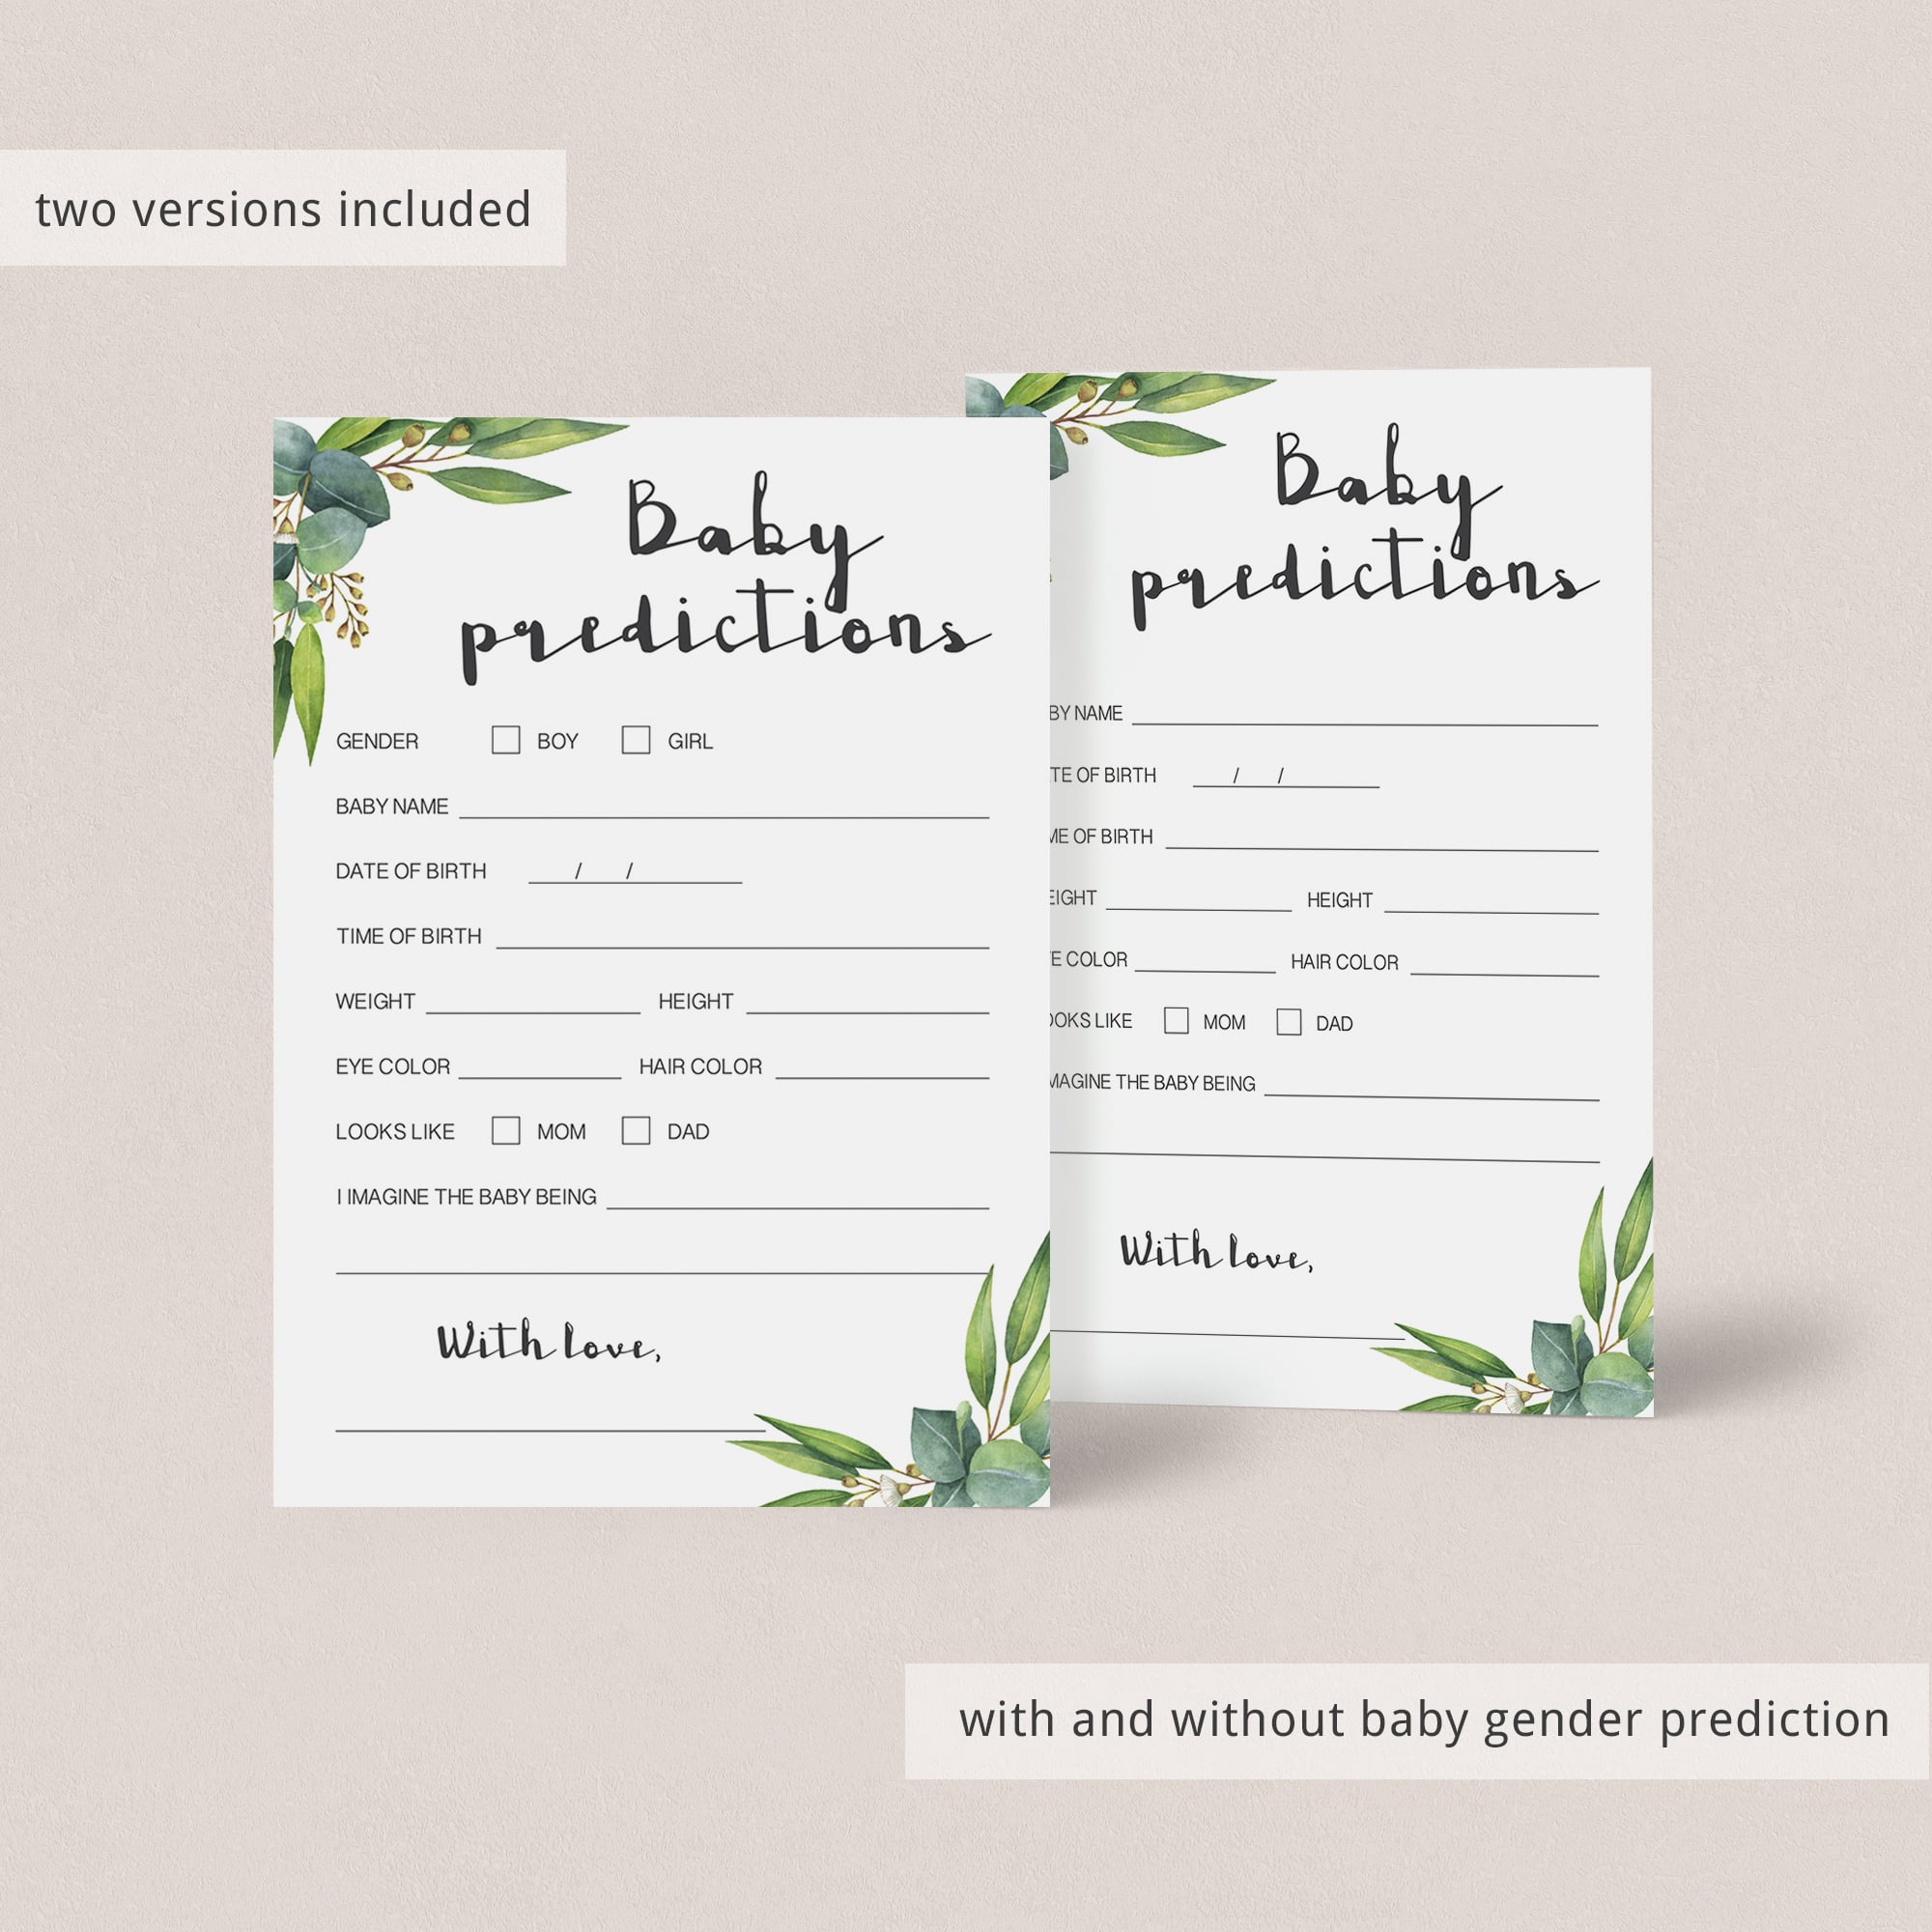 Gender neutral predictions game for botanical baby shower party by LittleSizzle